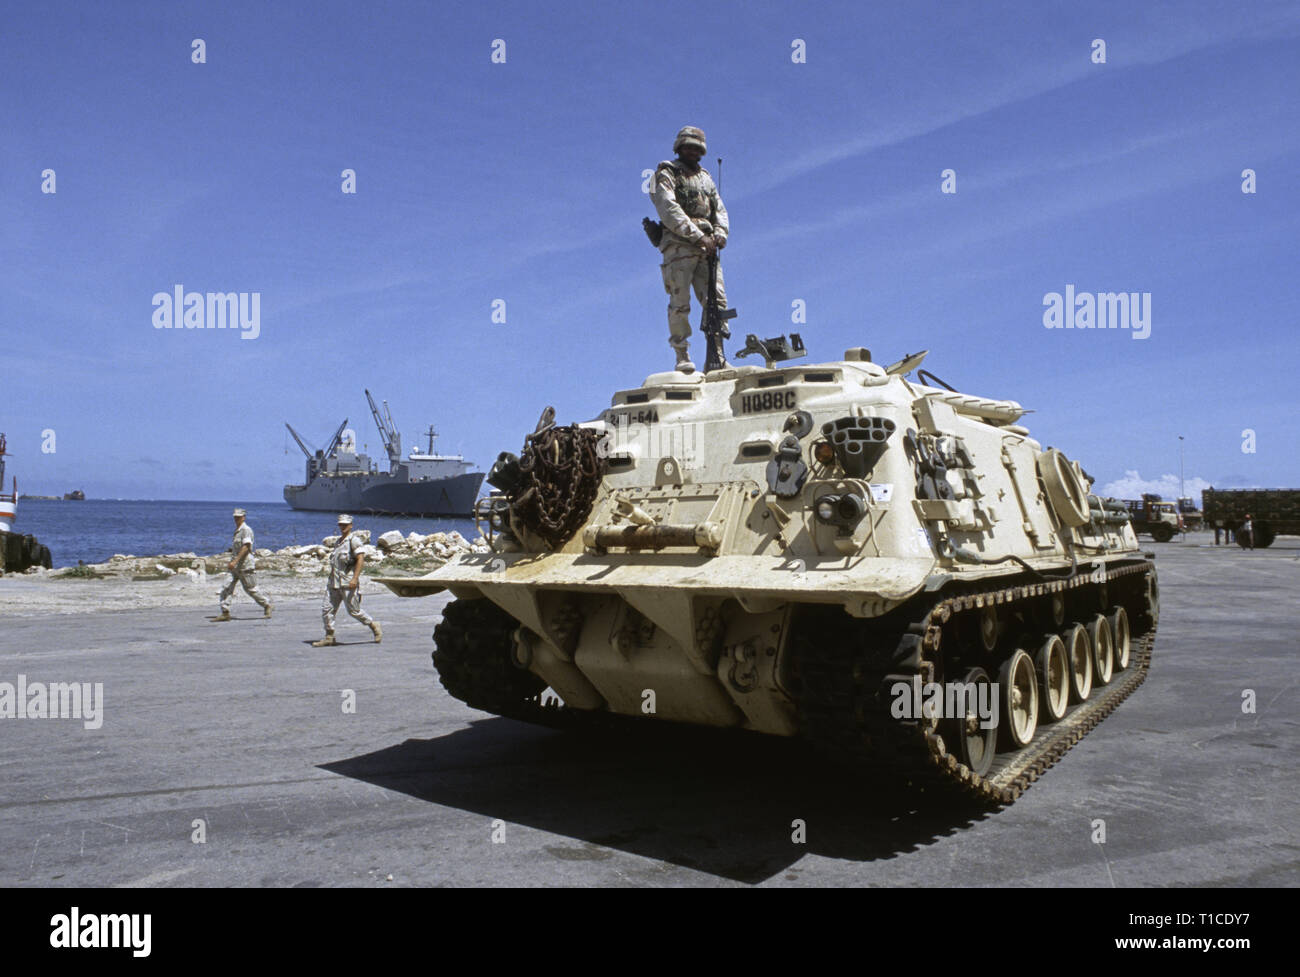 29th October 1993 A U.S. Army soldier of the 24th Infantry Division, 1st Battalion of the 64th Armored Regiment, stands on top of his M88 recovery vehicle, in the port in Mogadishu, Somalia. It has just arrived by sea on board the SS Denebola, which can be seen docked in the background. Stock Photo